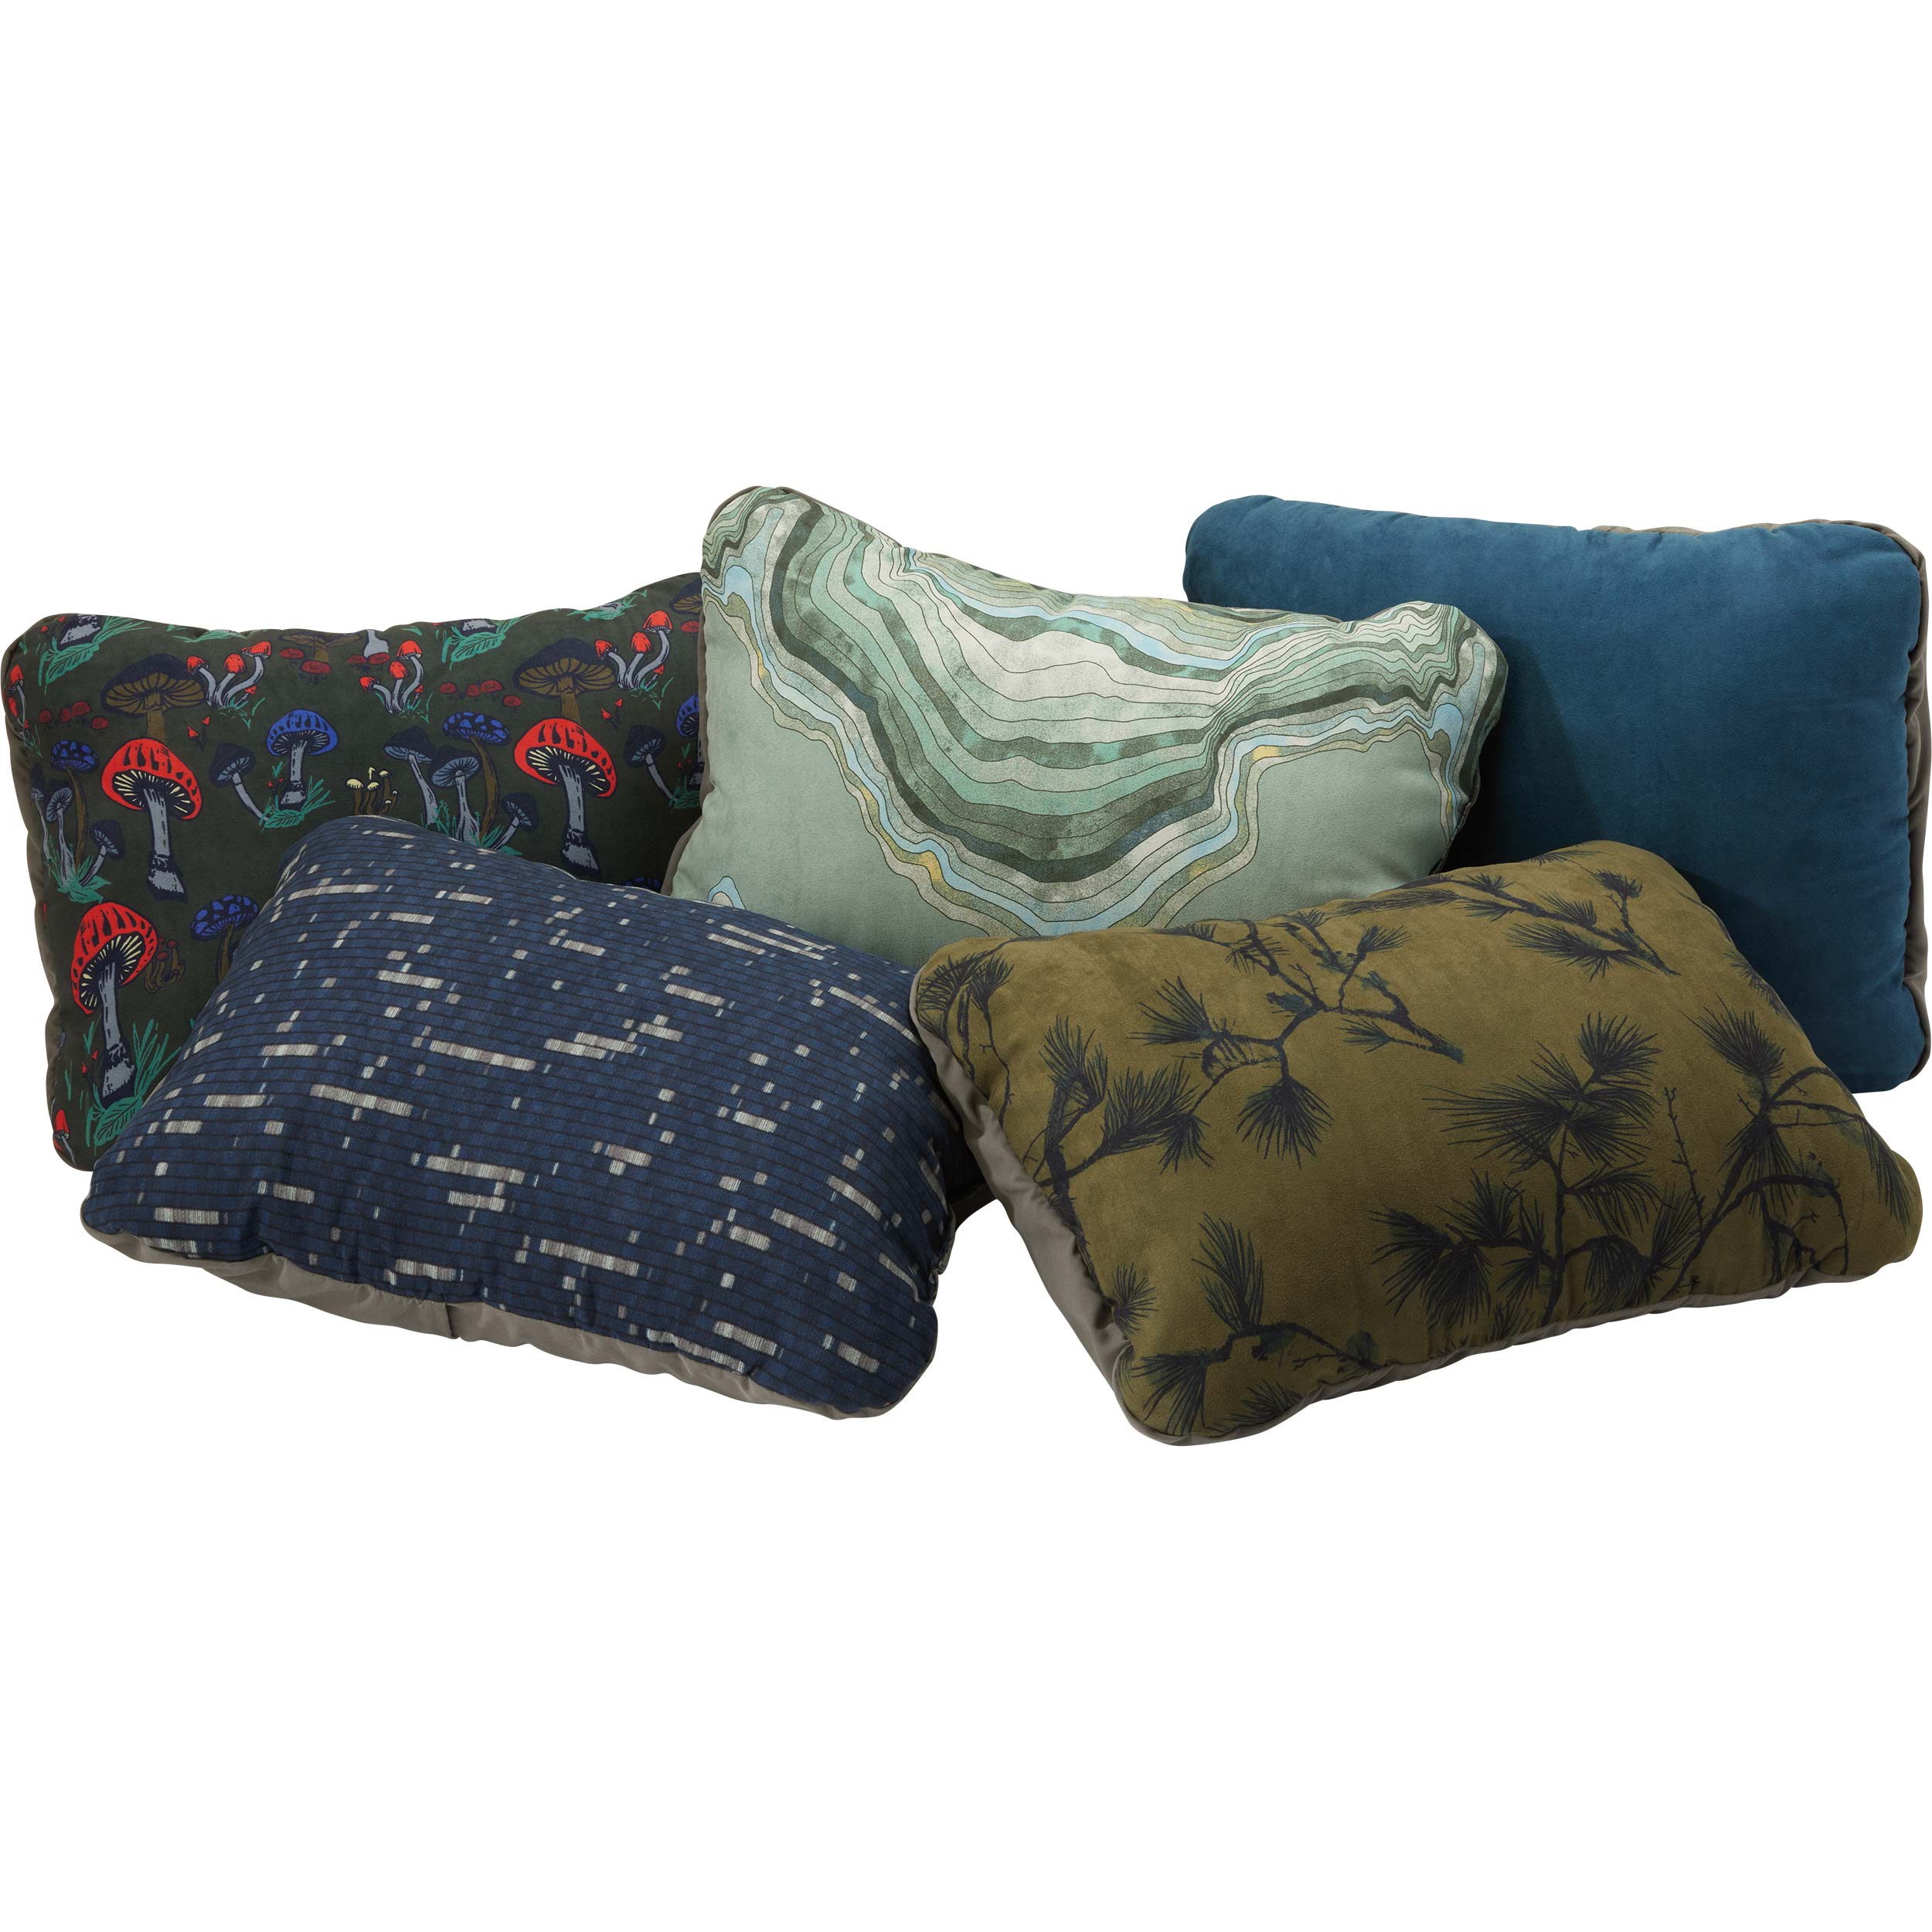 https://www.thermarest.com/on/demandware.static/-/Sites-thermarest-master-catalog/default/dw72a10e0c/images/large/23_thermarest_compressible_pillow_cinch_group.jpg